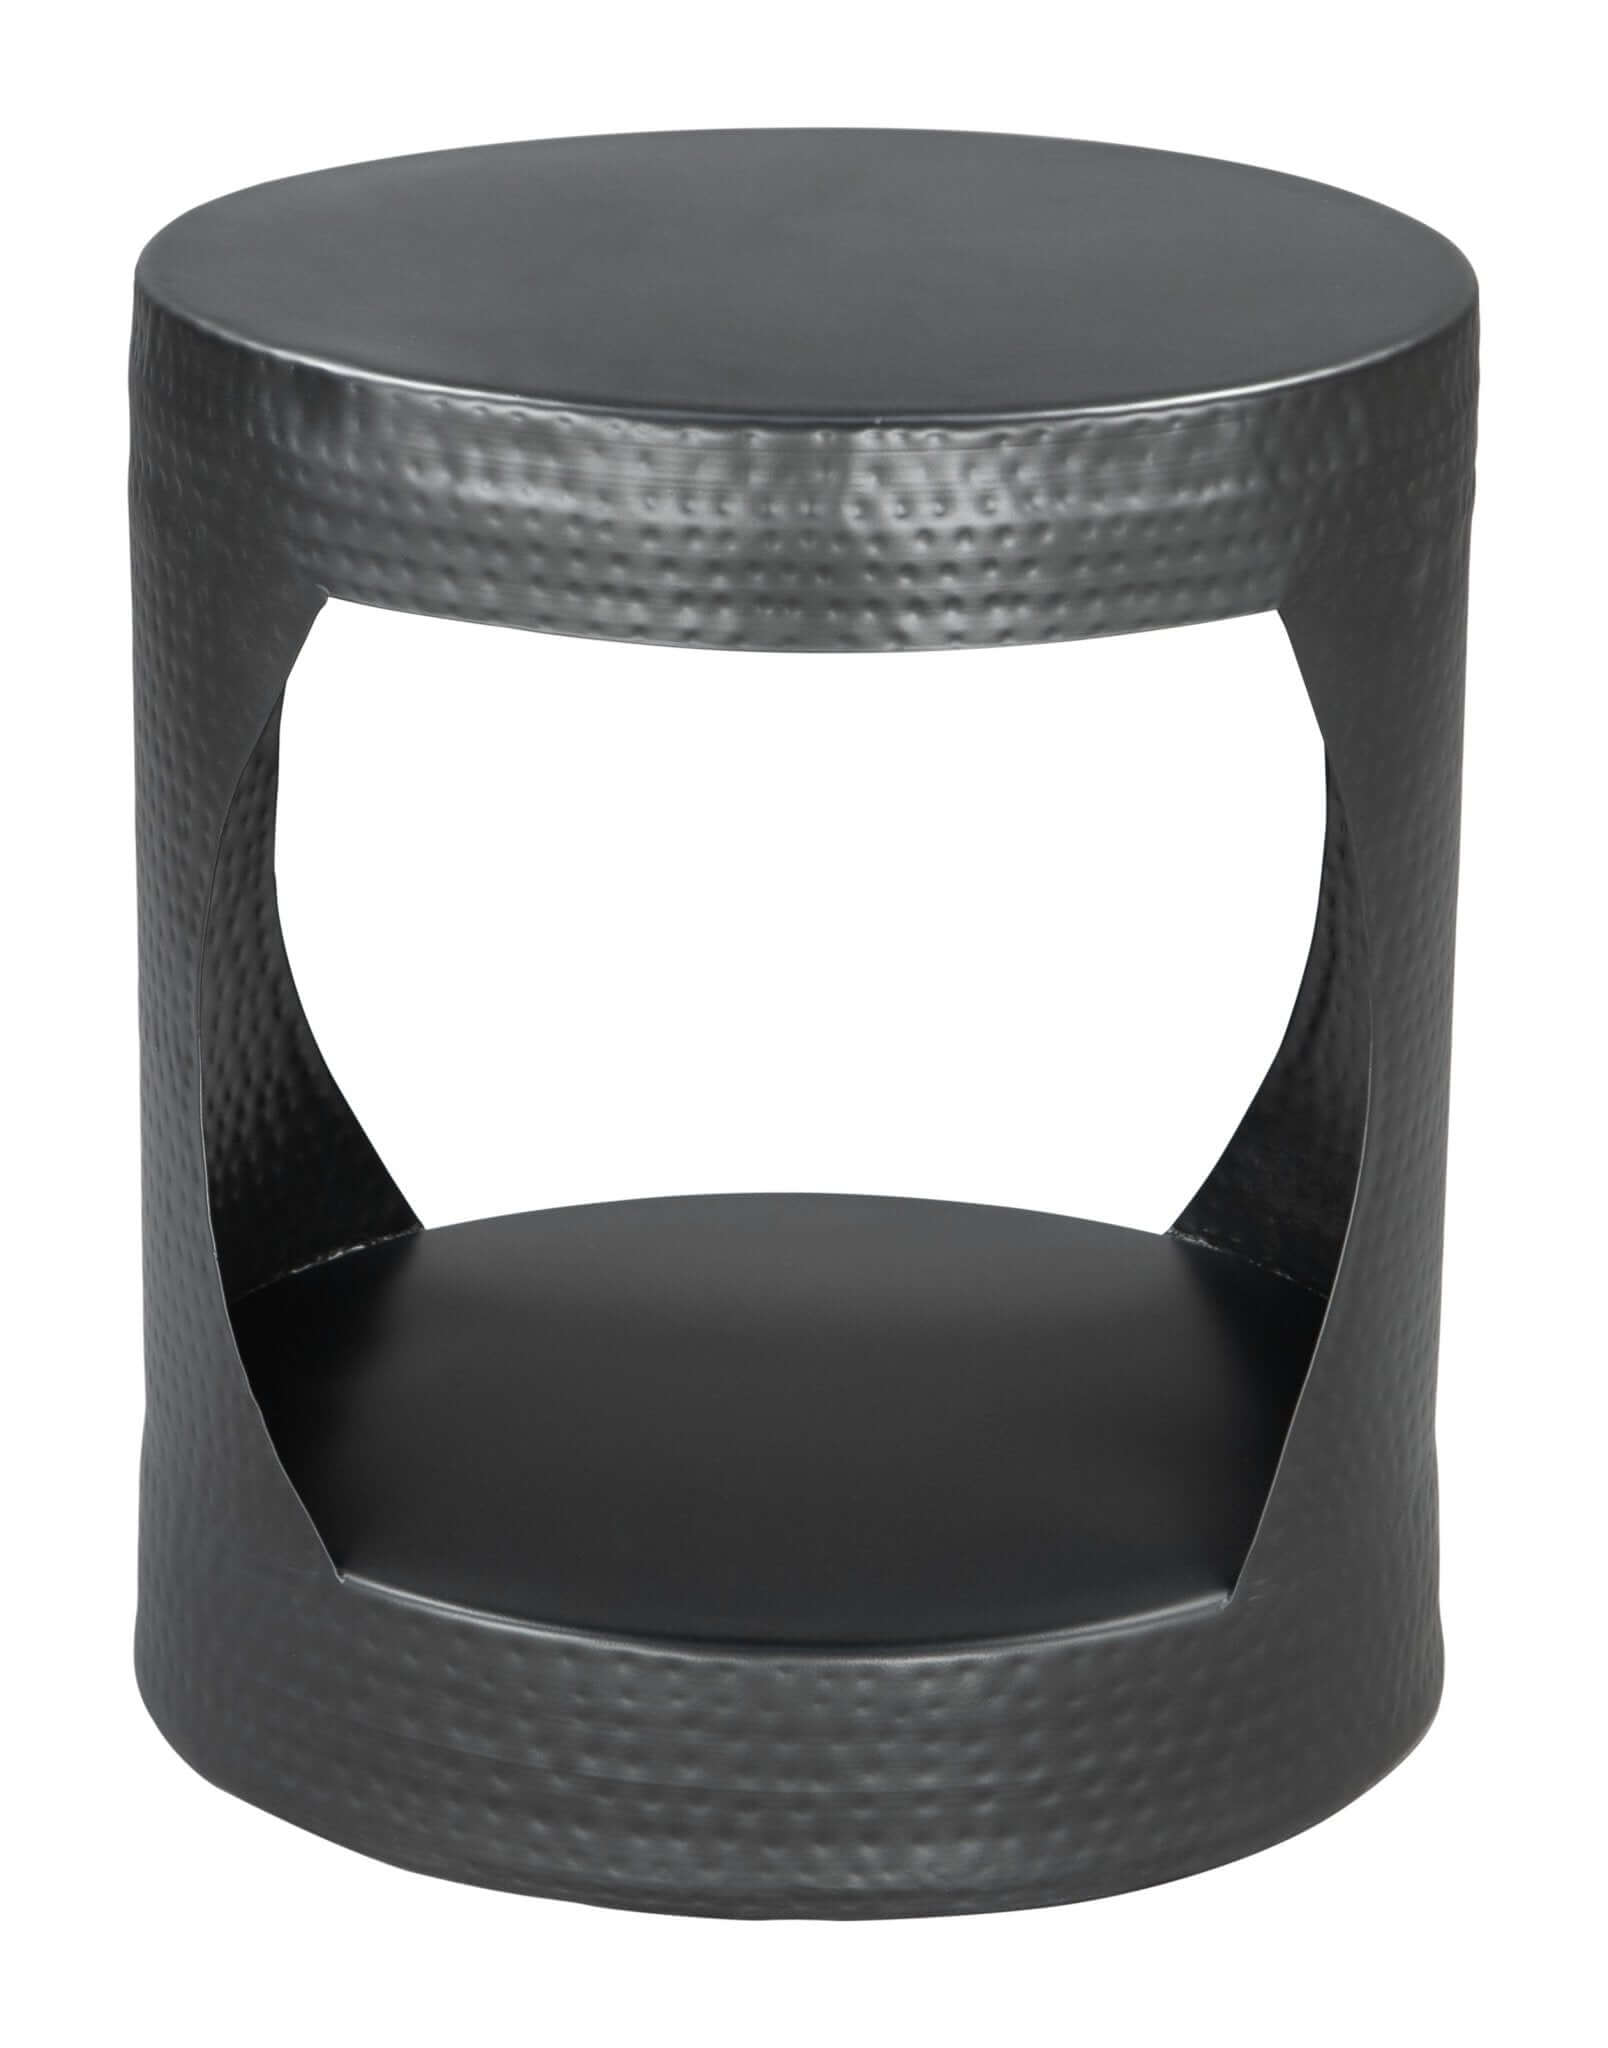 Nuuk Cylindrical Iron Side End Table in Black - Revel Sofa 